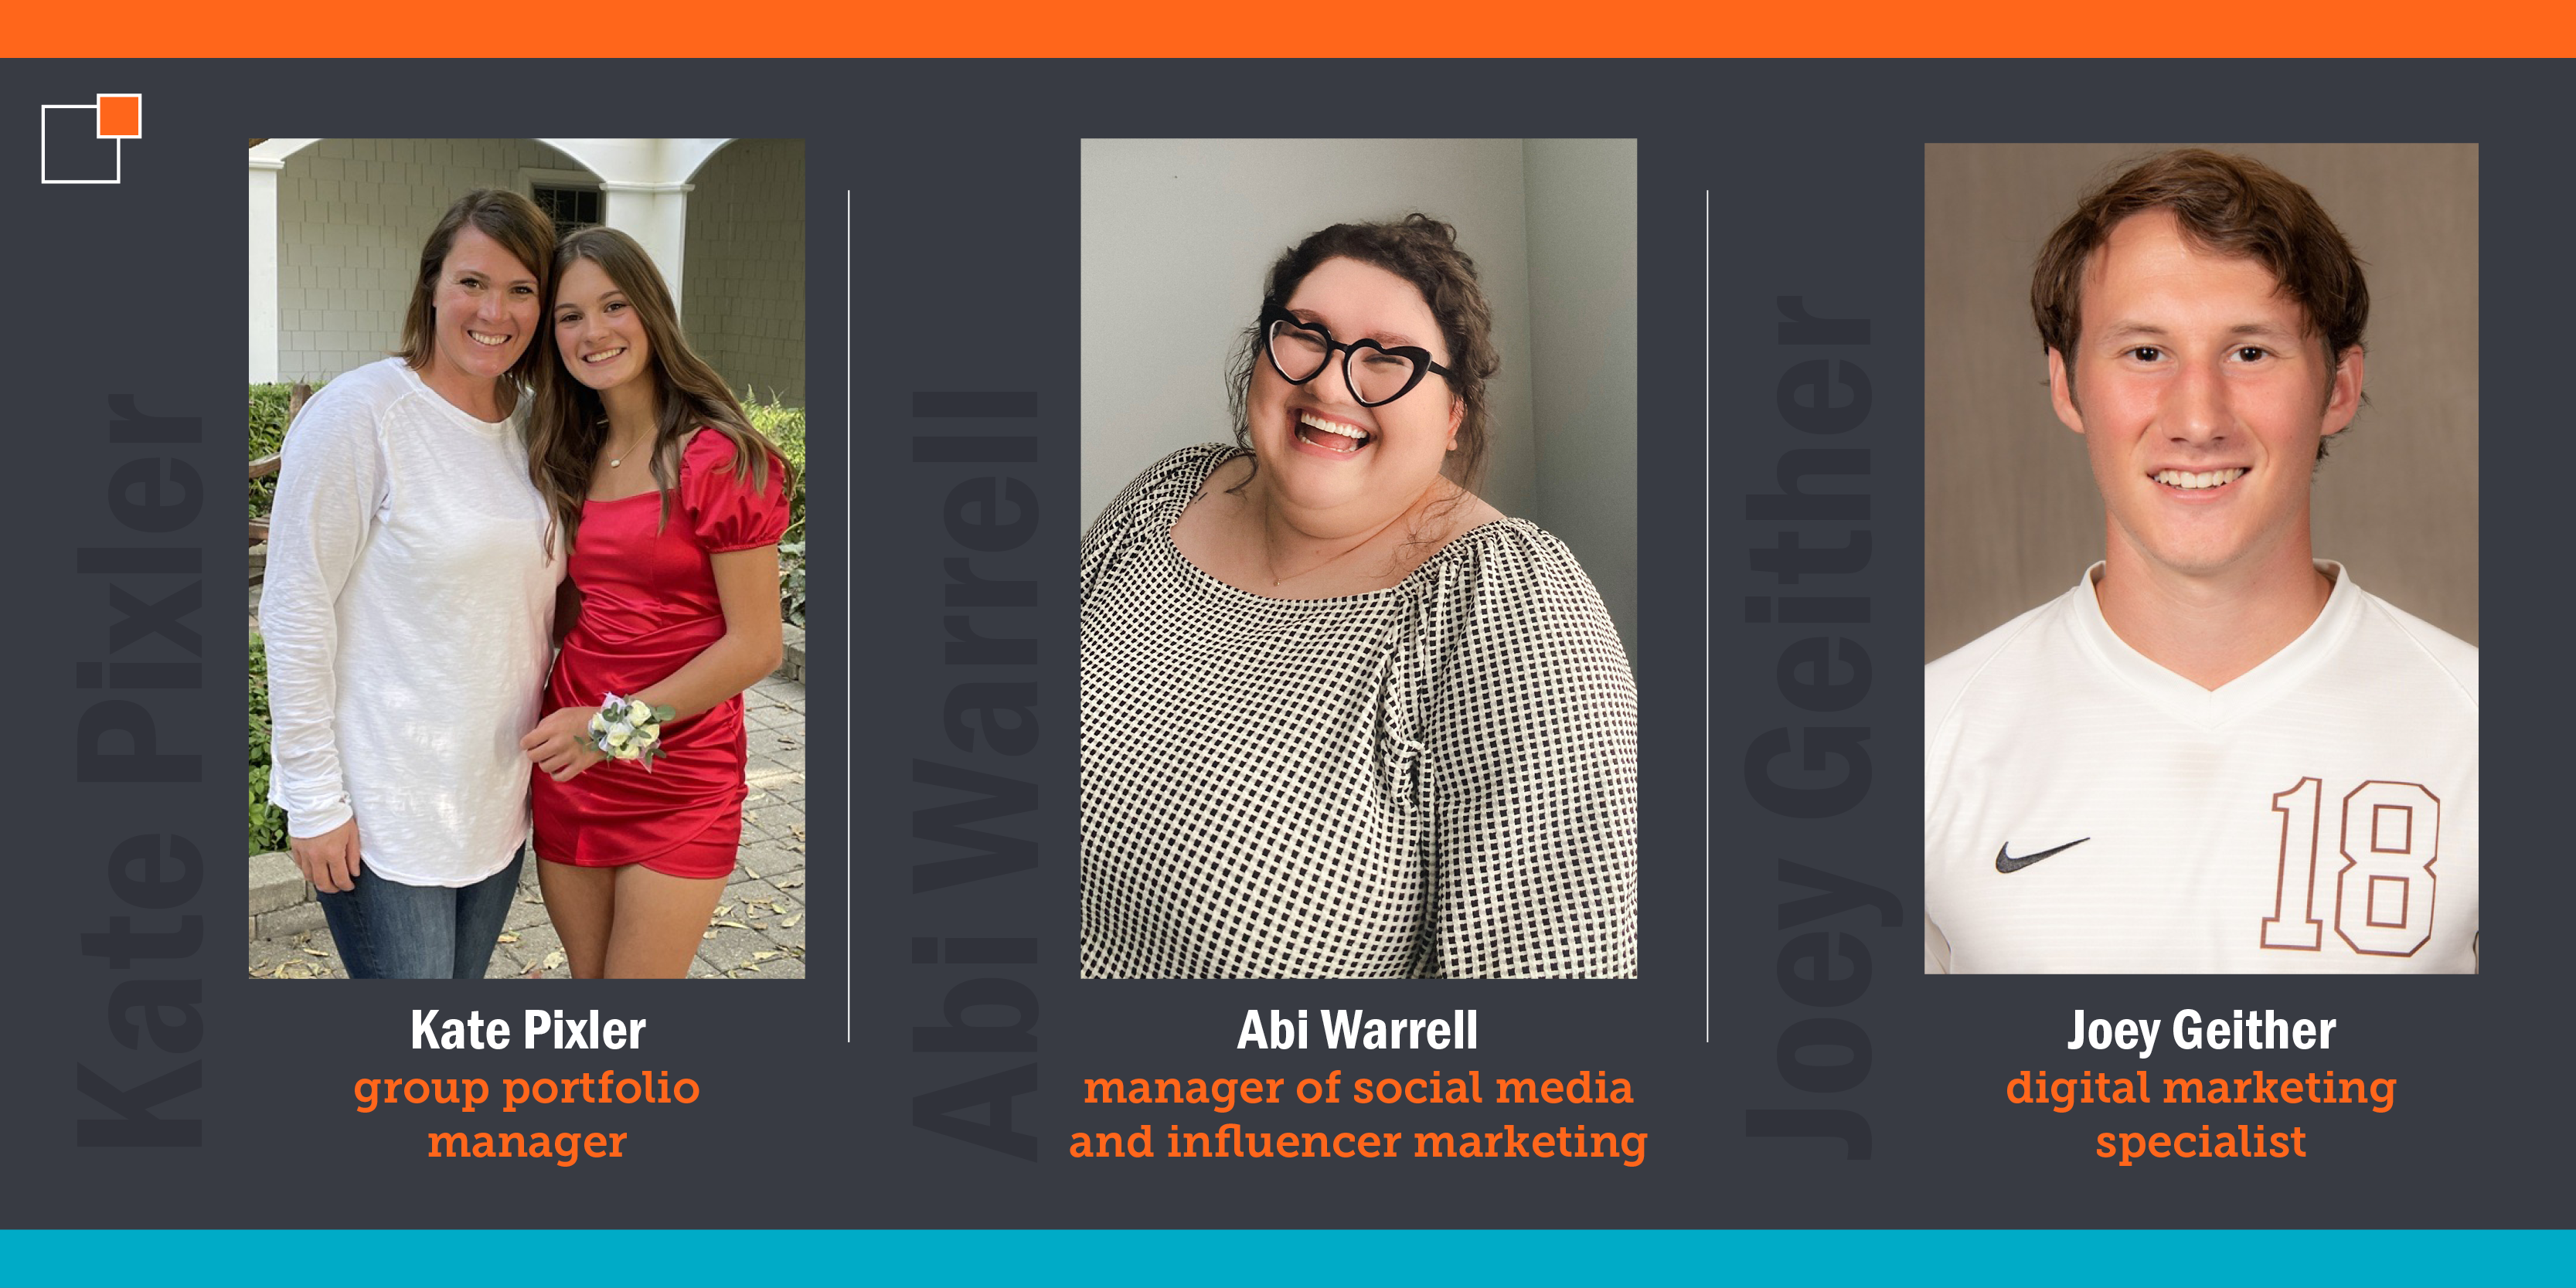 Kate Pixler: Group Portfolio Manager, Abi Warrell: manager of social media and influencer marketing, Joey Geither: digital marketing specialist